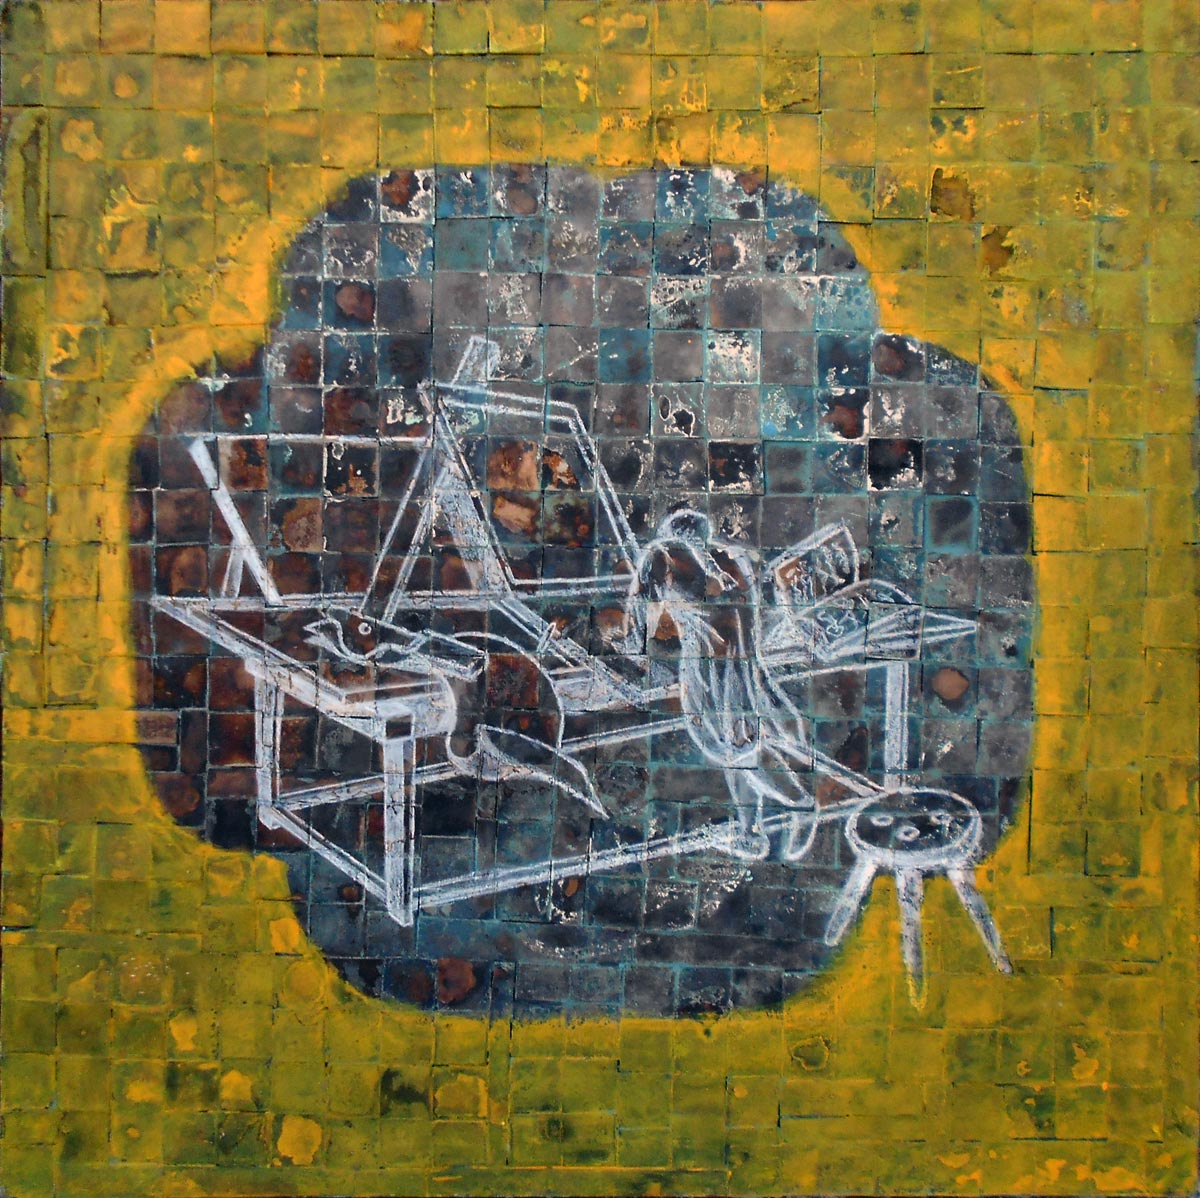  The Apprentice  Mixed media on canvas  34" x 34" 